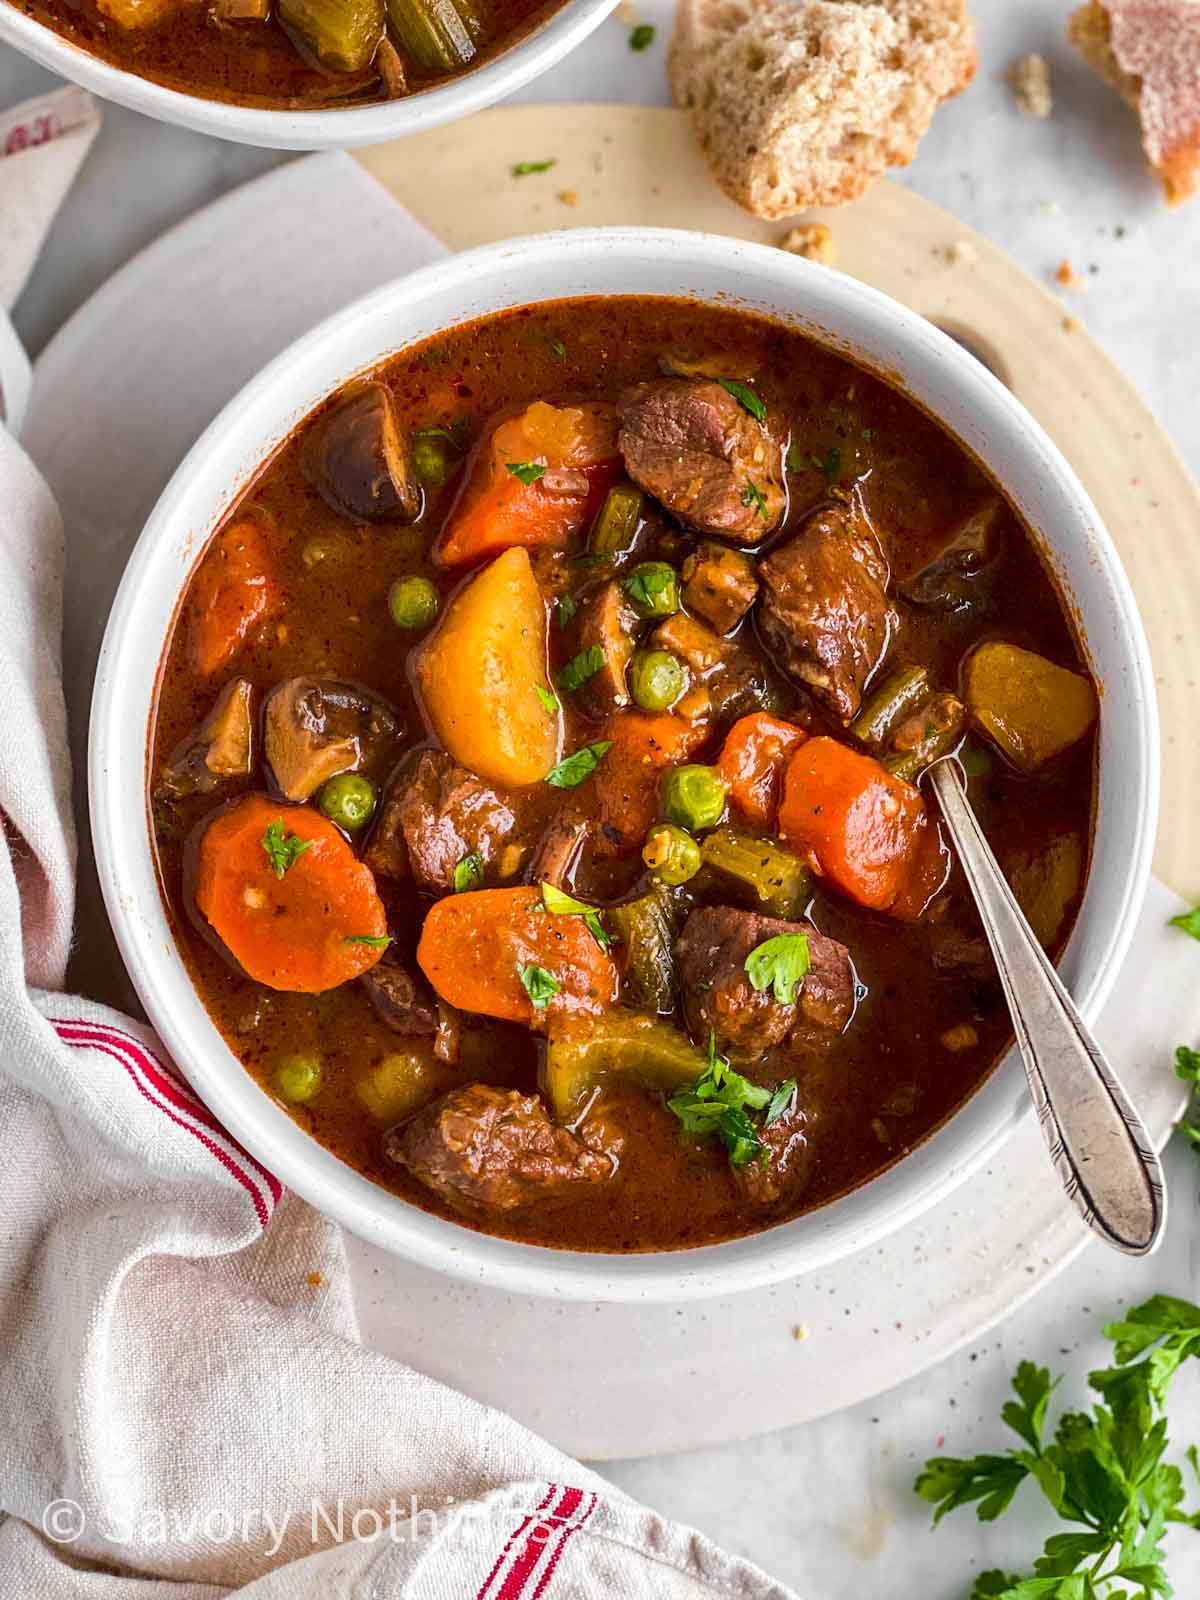 https://www.savorynothings.com/wp-content/uploads/2021/11/instant-pot-beef-stew-image-0.jpg